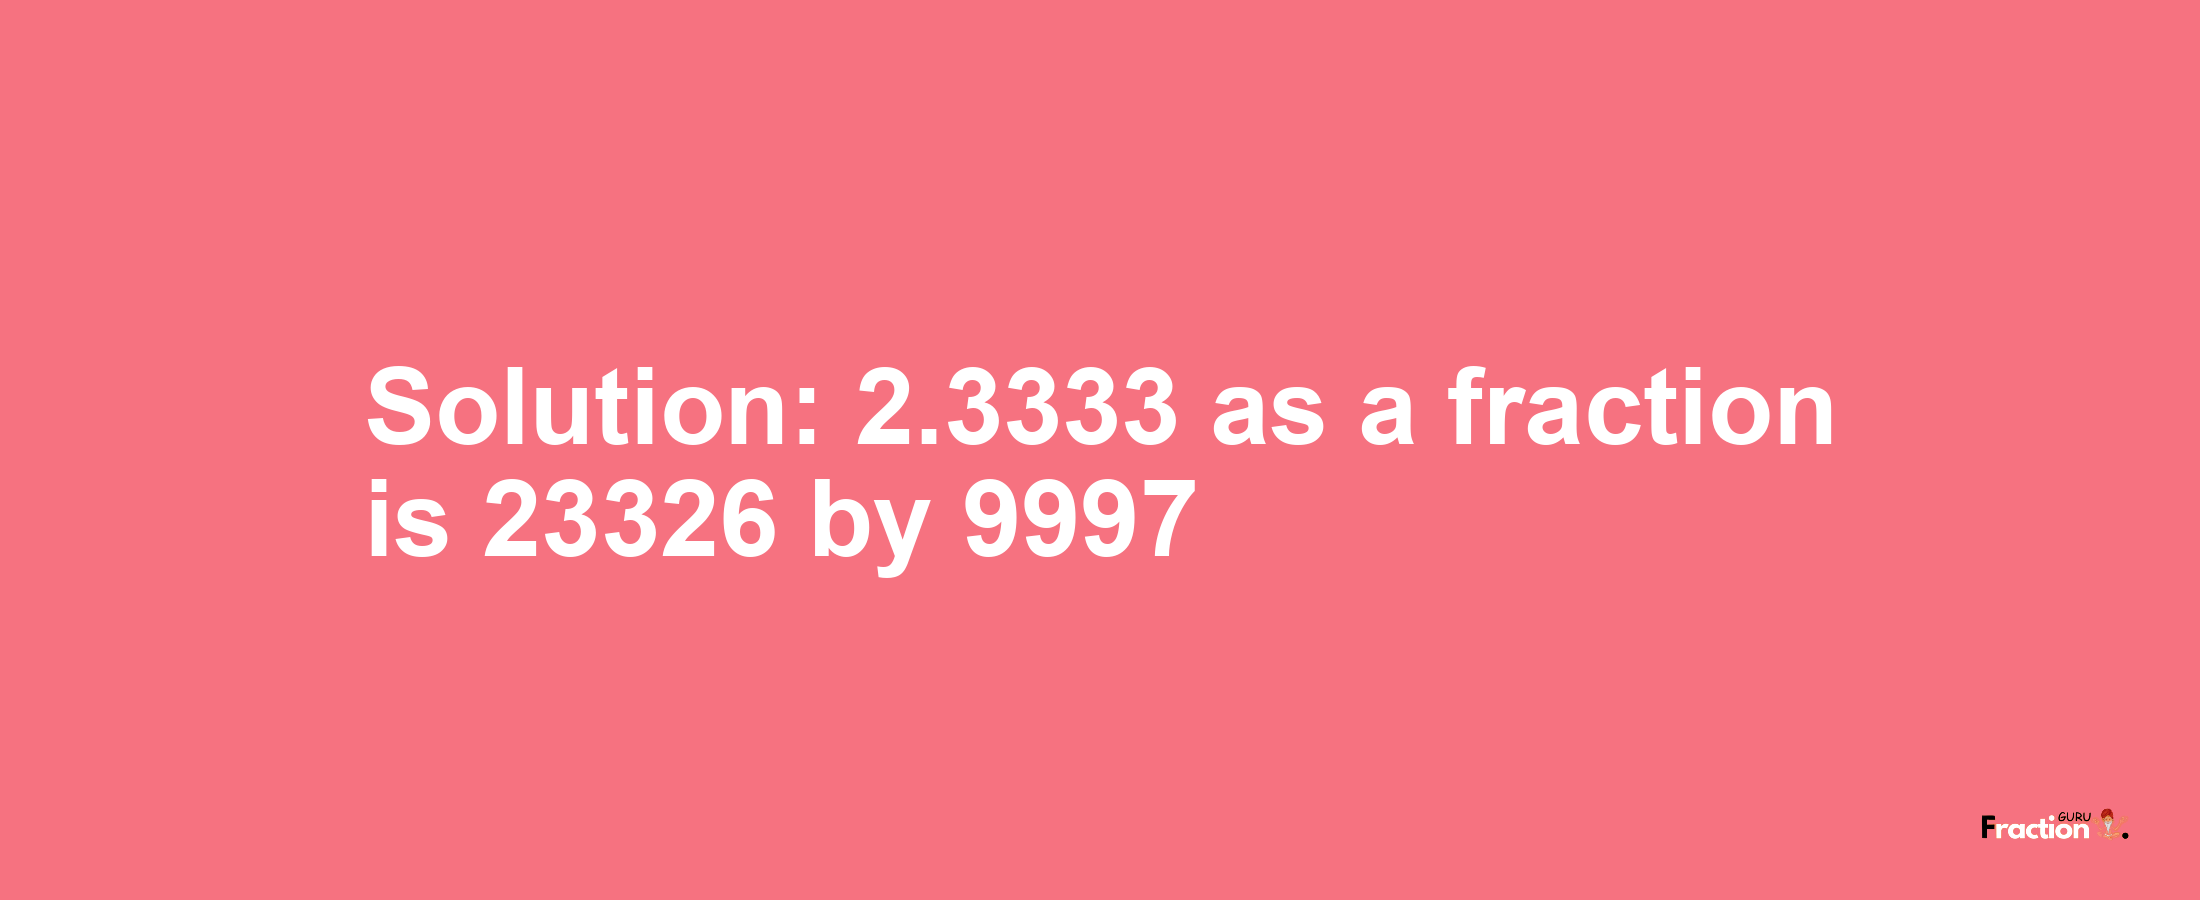 Solution:2.3333 as a fraction is 23326/9997